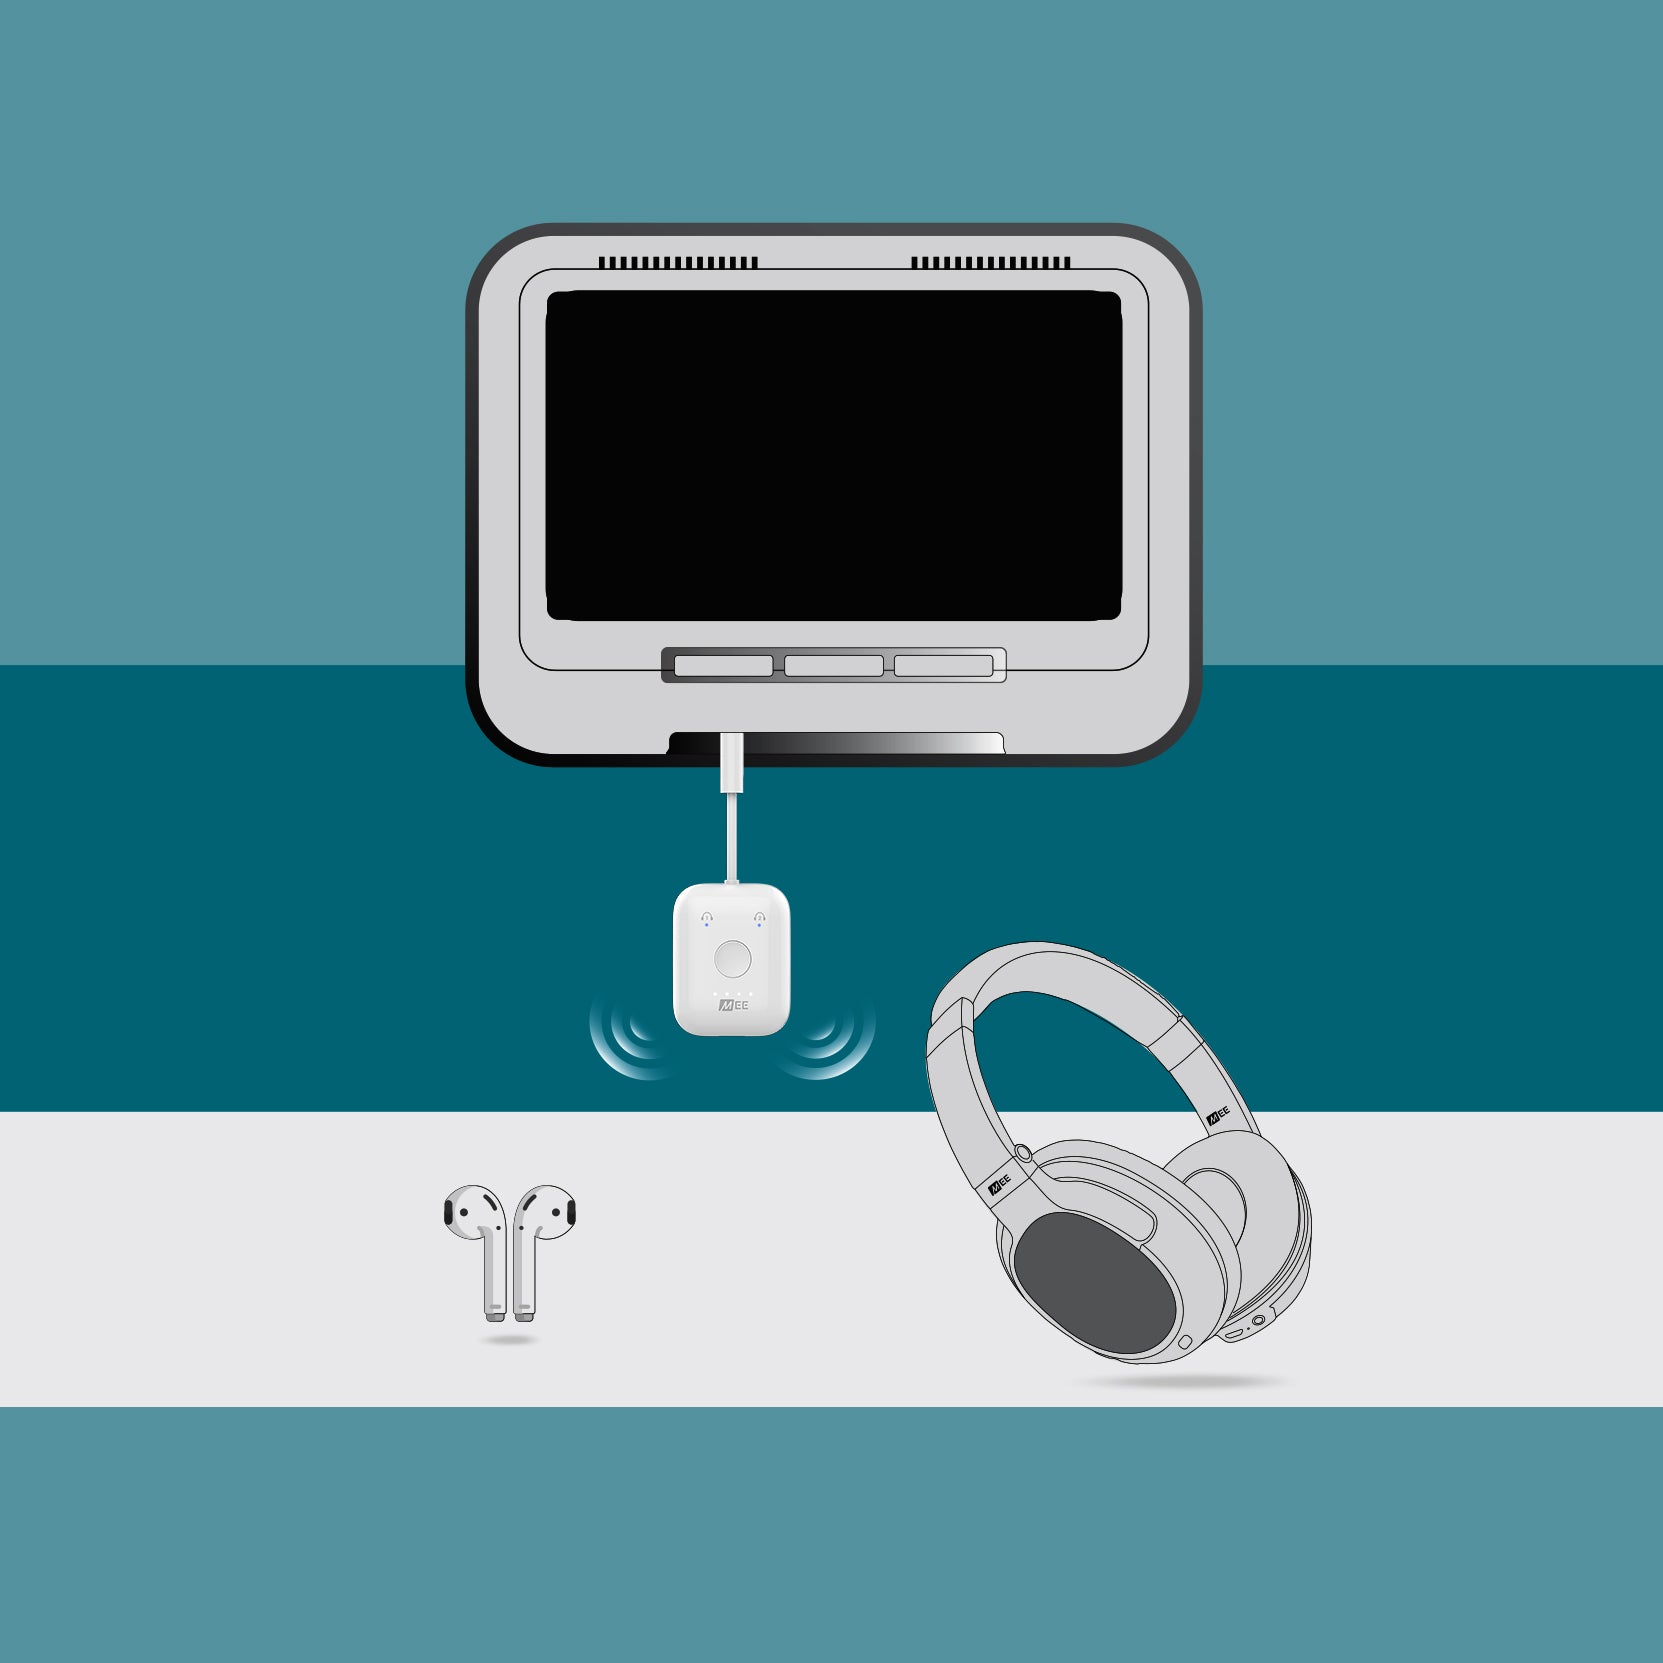 Graphic illustration of electronic devices, including a computer monitor, a webcam mounted above it, wired and wireless earphones, and over-ear headphones, all against a two-tone blue background.